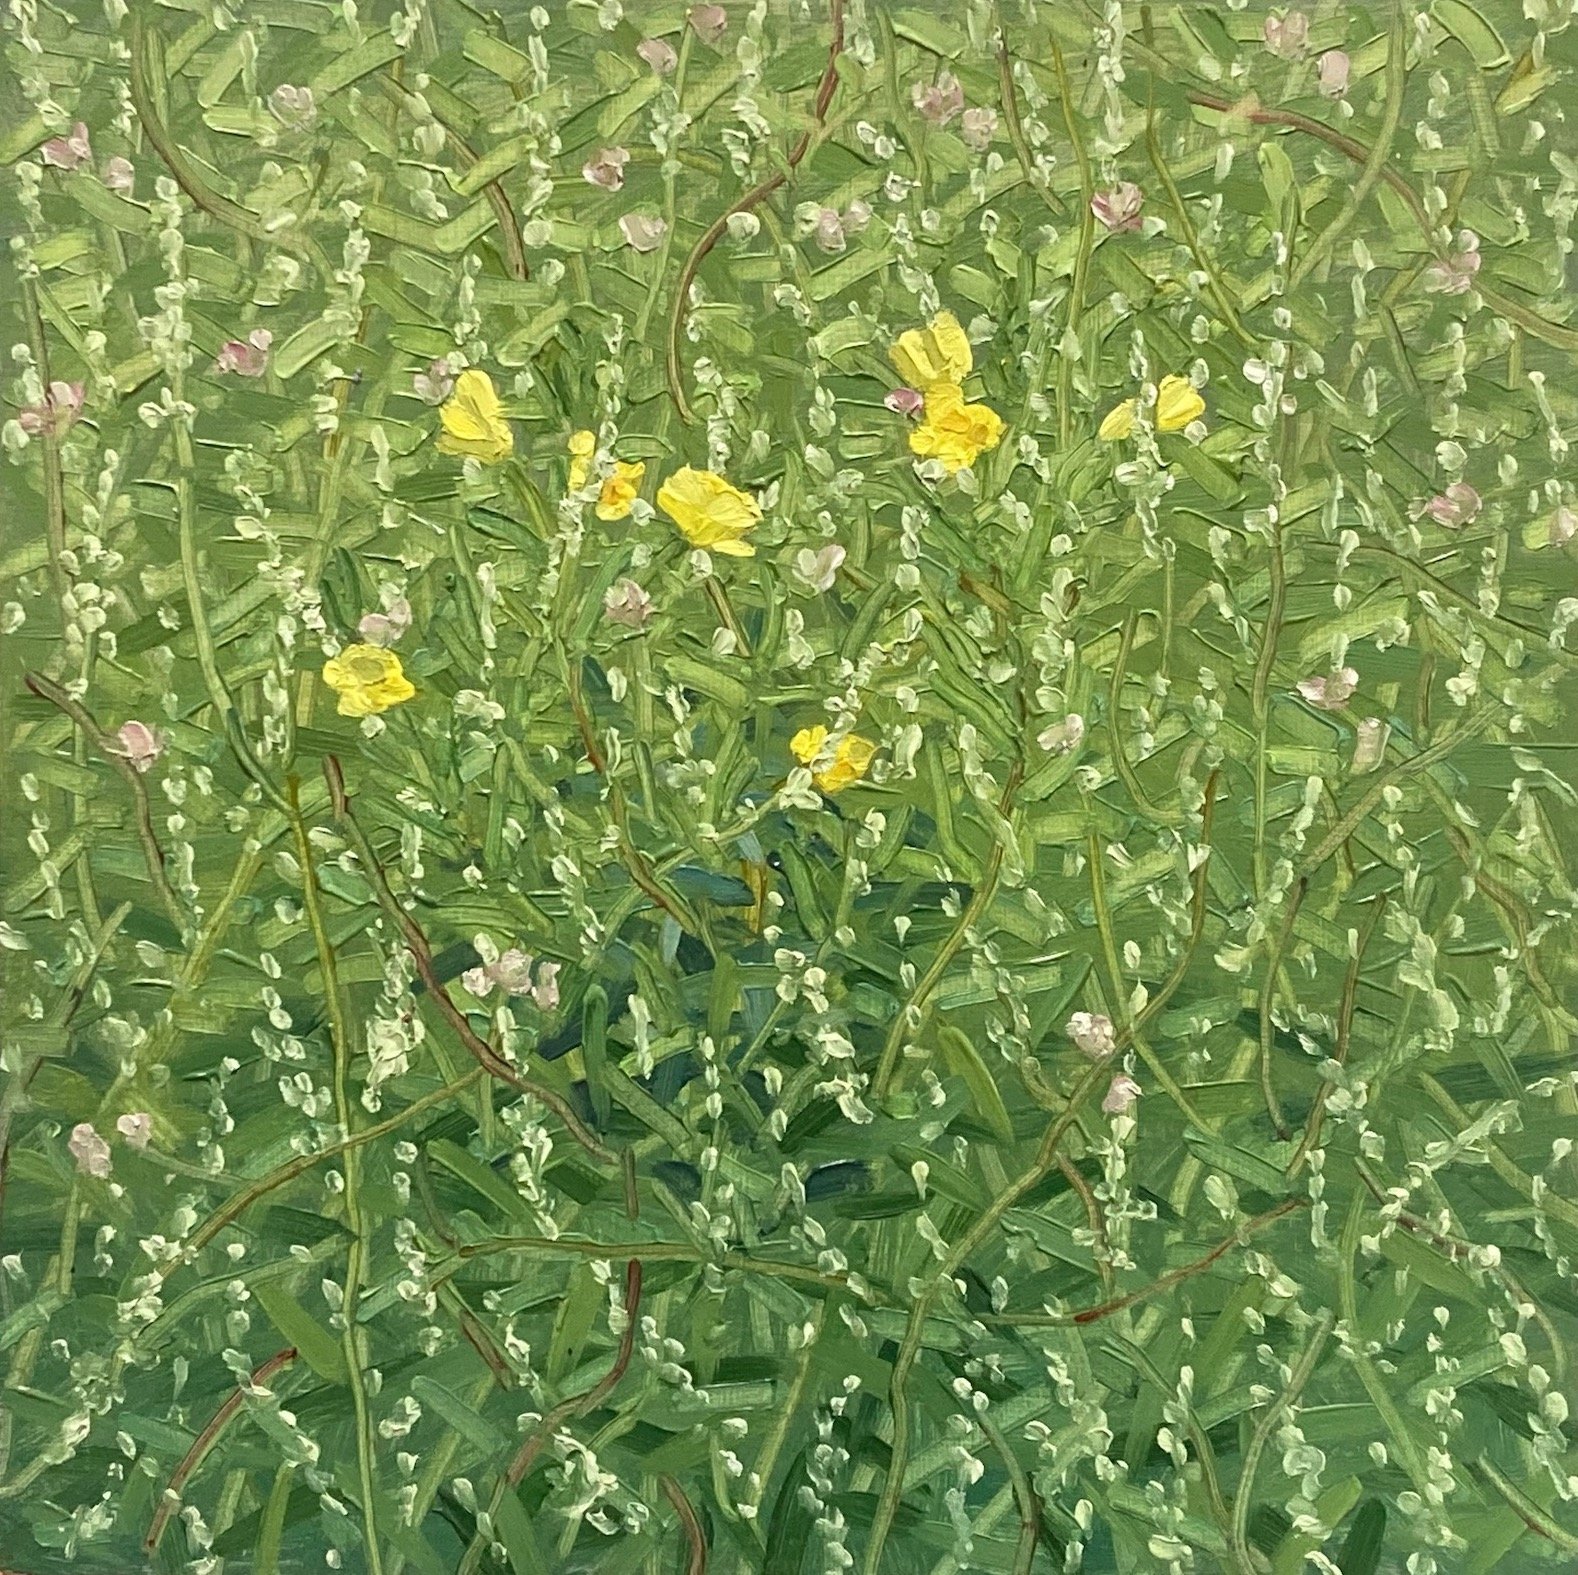 Buttercups and Smartweed